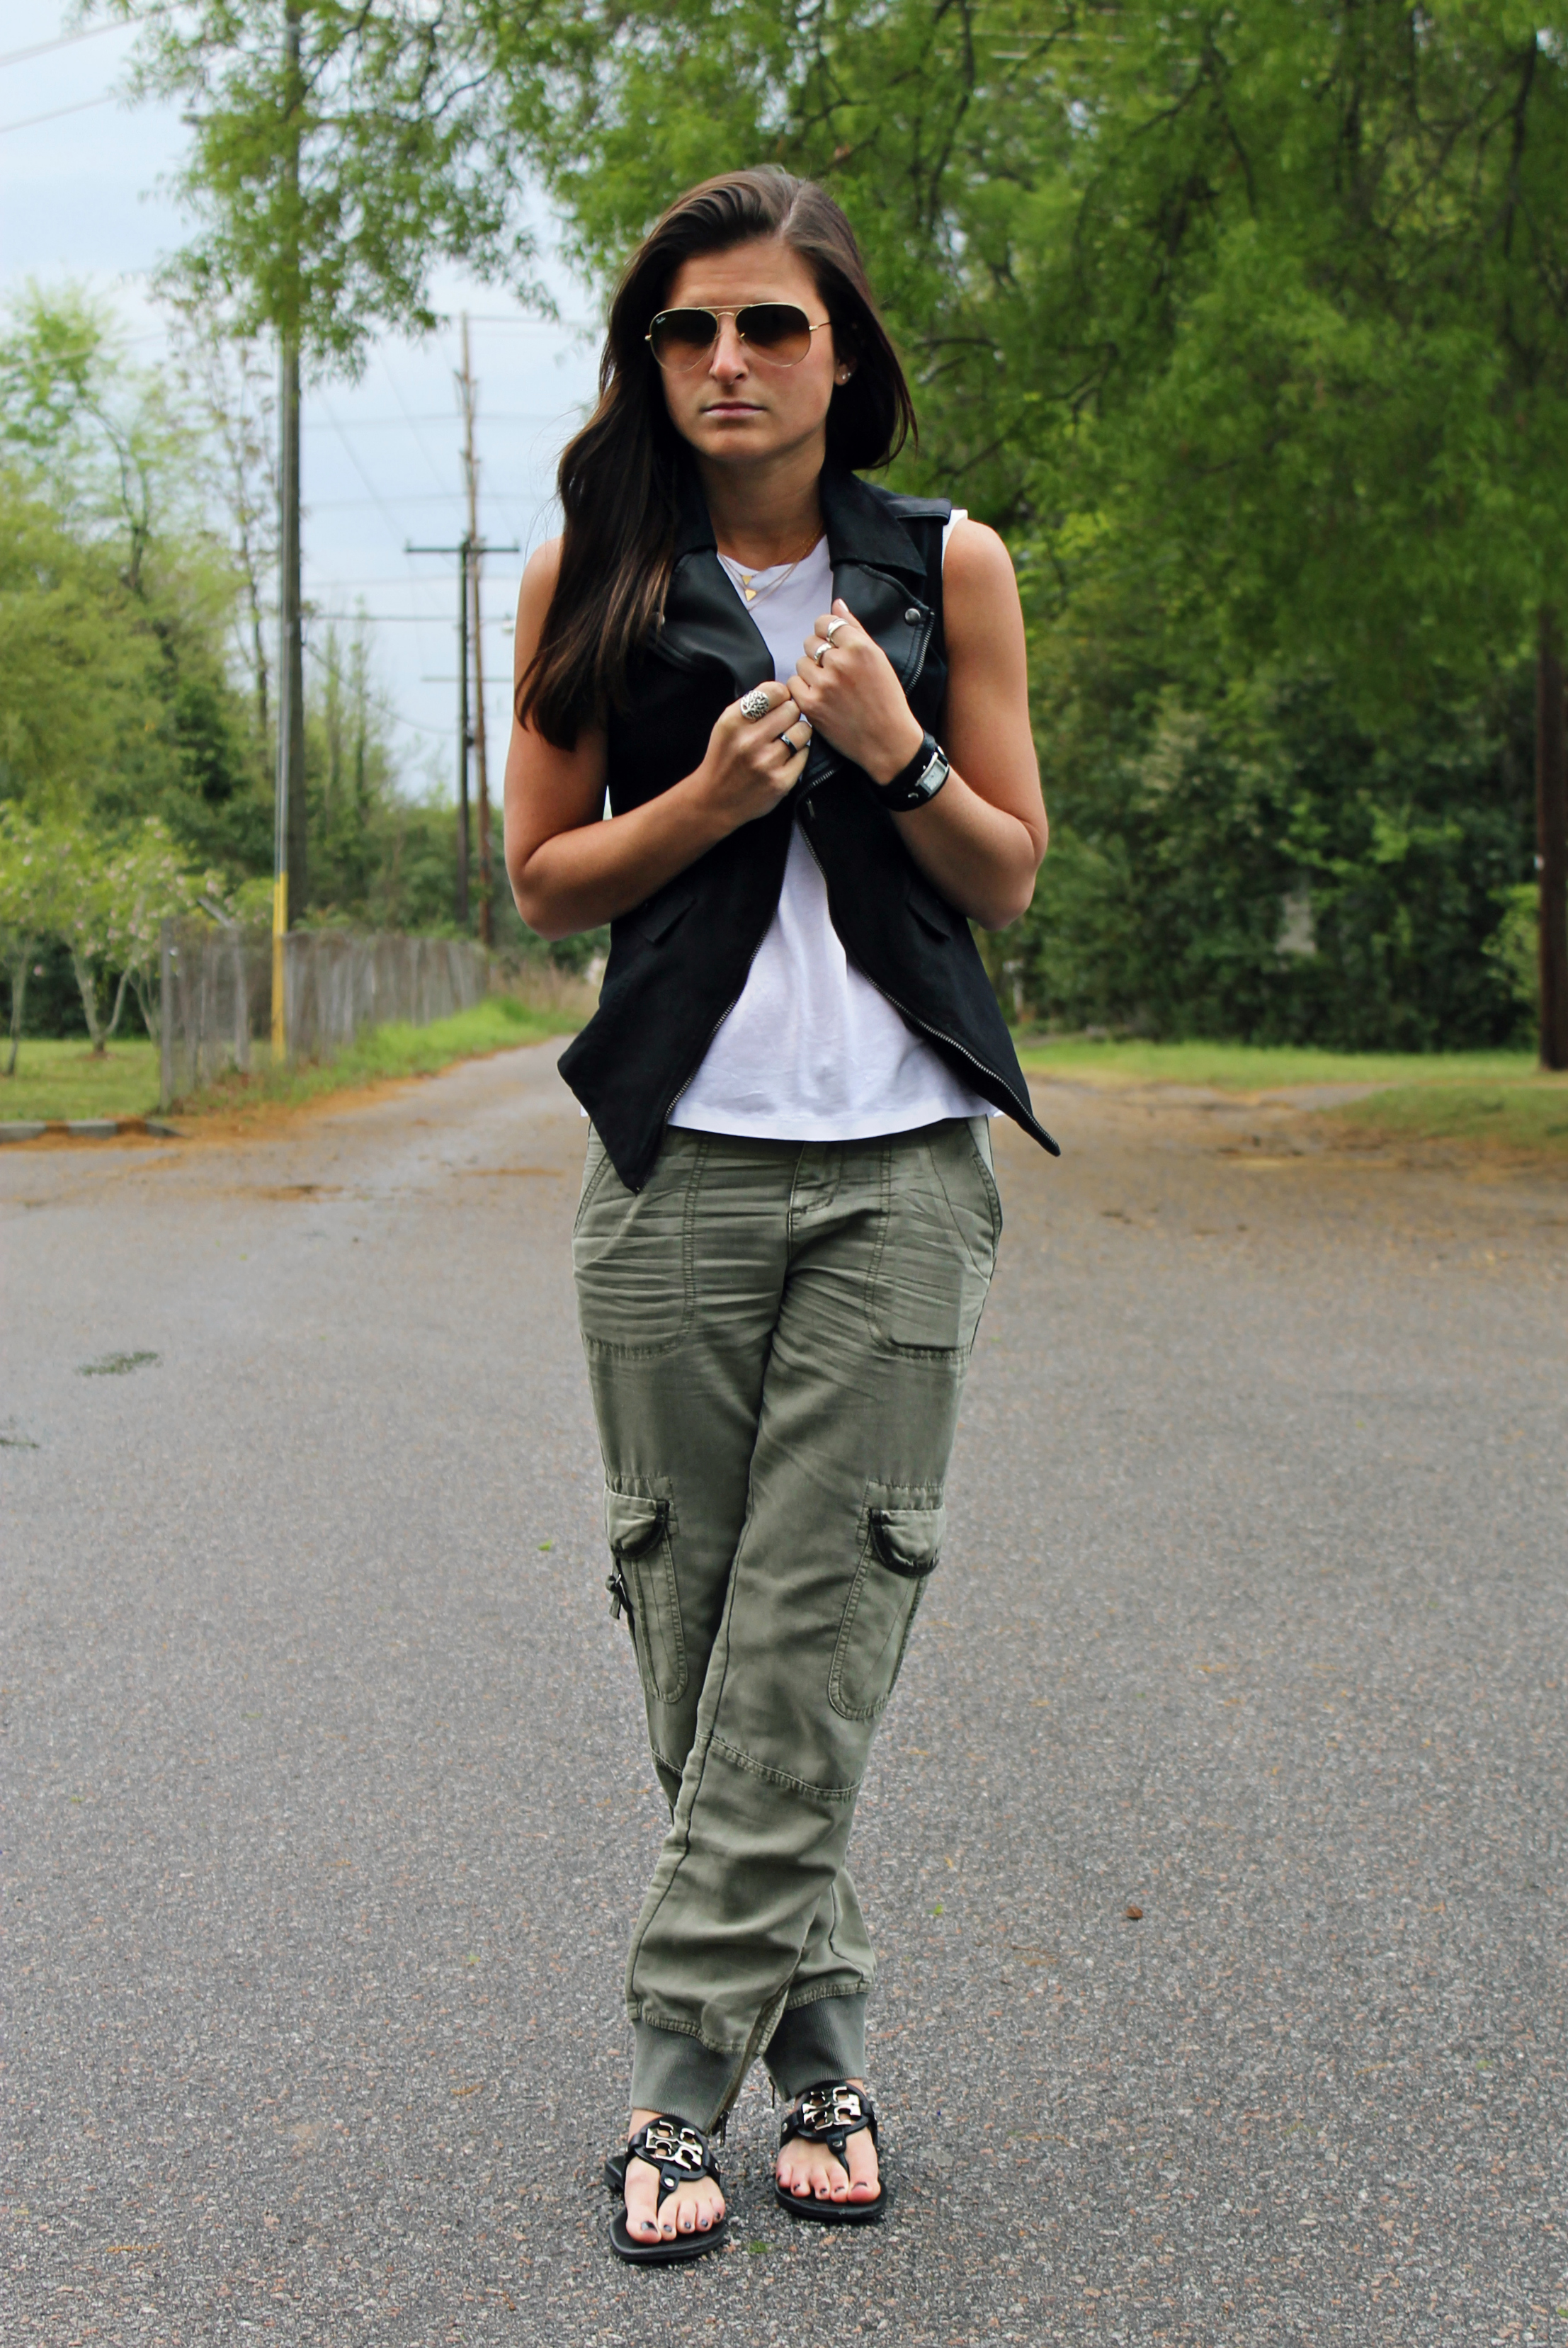 The Cargo Pant - To Be Bright